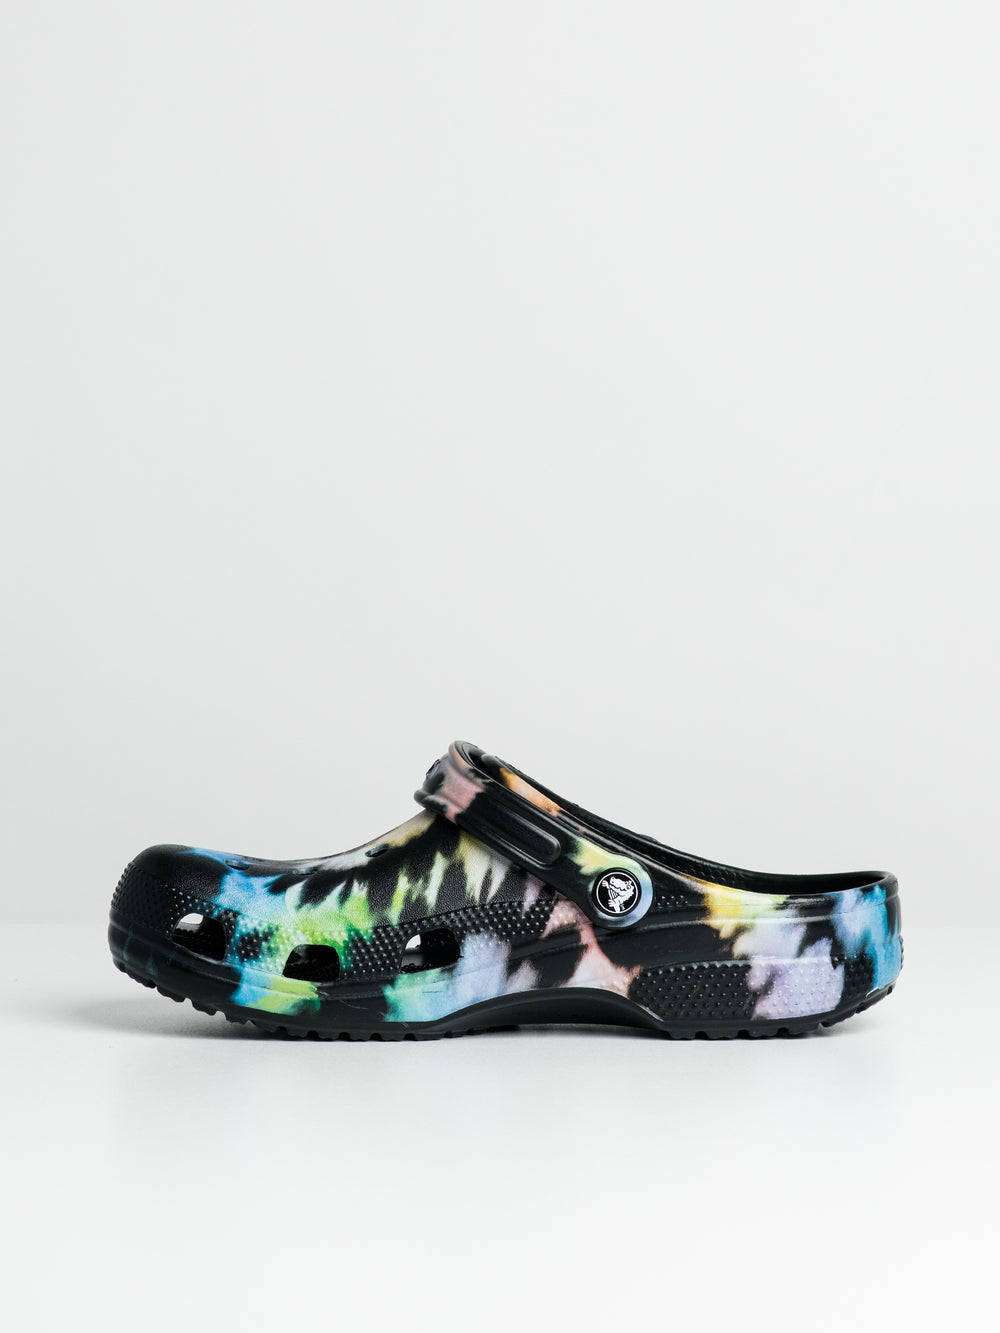 WOMENS CROCS CLASSIC TIE DYE GRAPHIC CLOGS - CLEARANCE